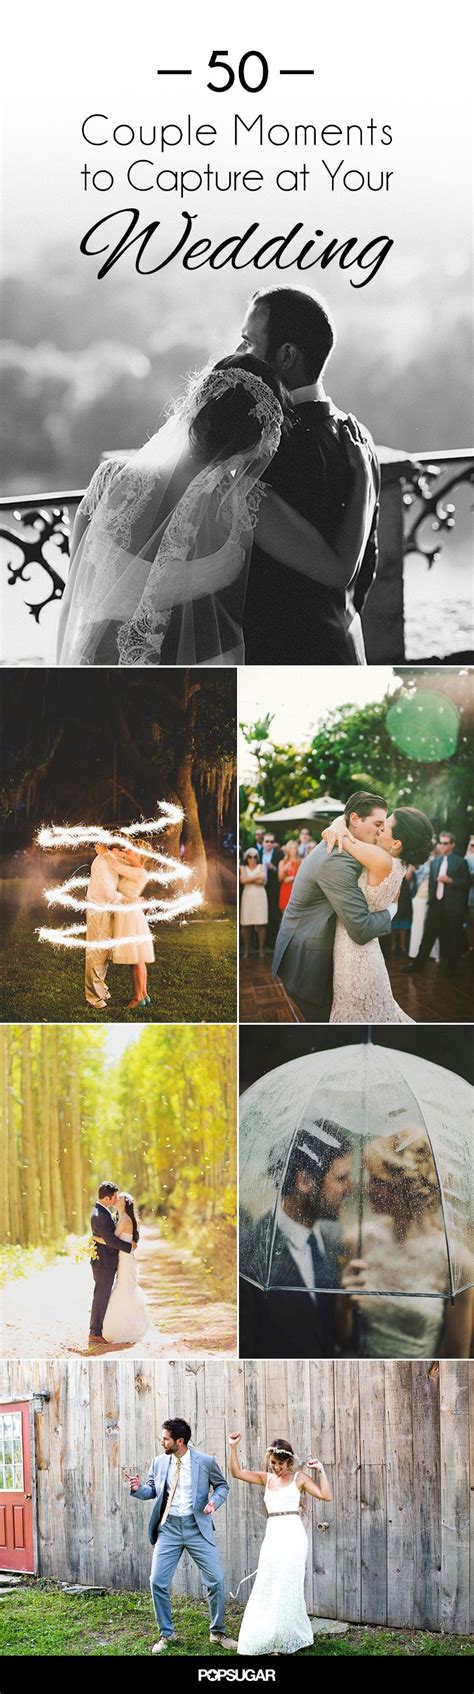 100 Couple Moments To Capture At Your Wedding Wedding Photography